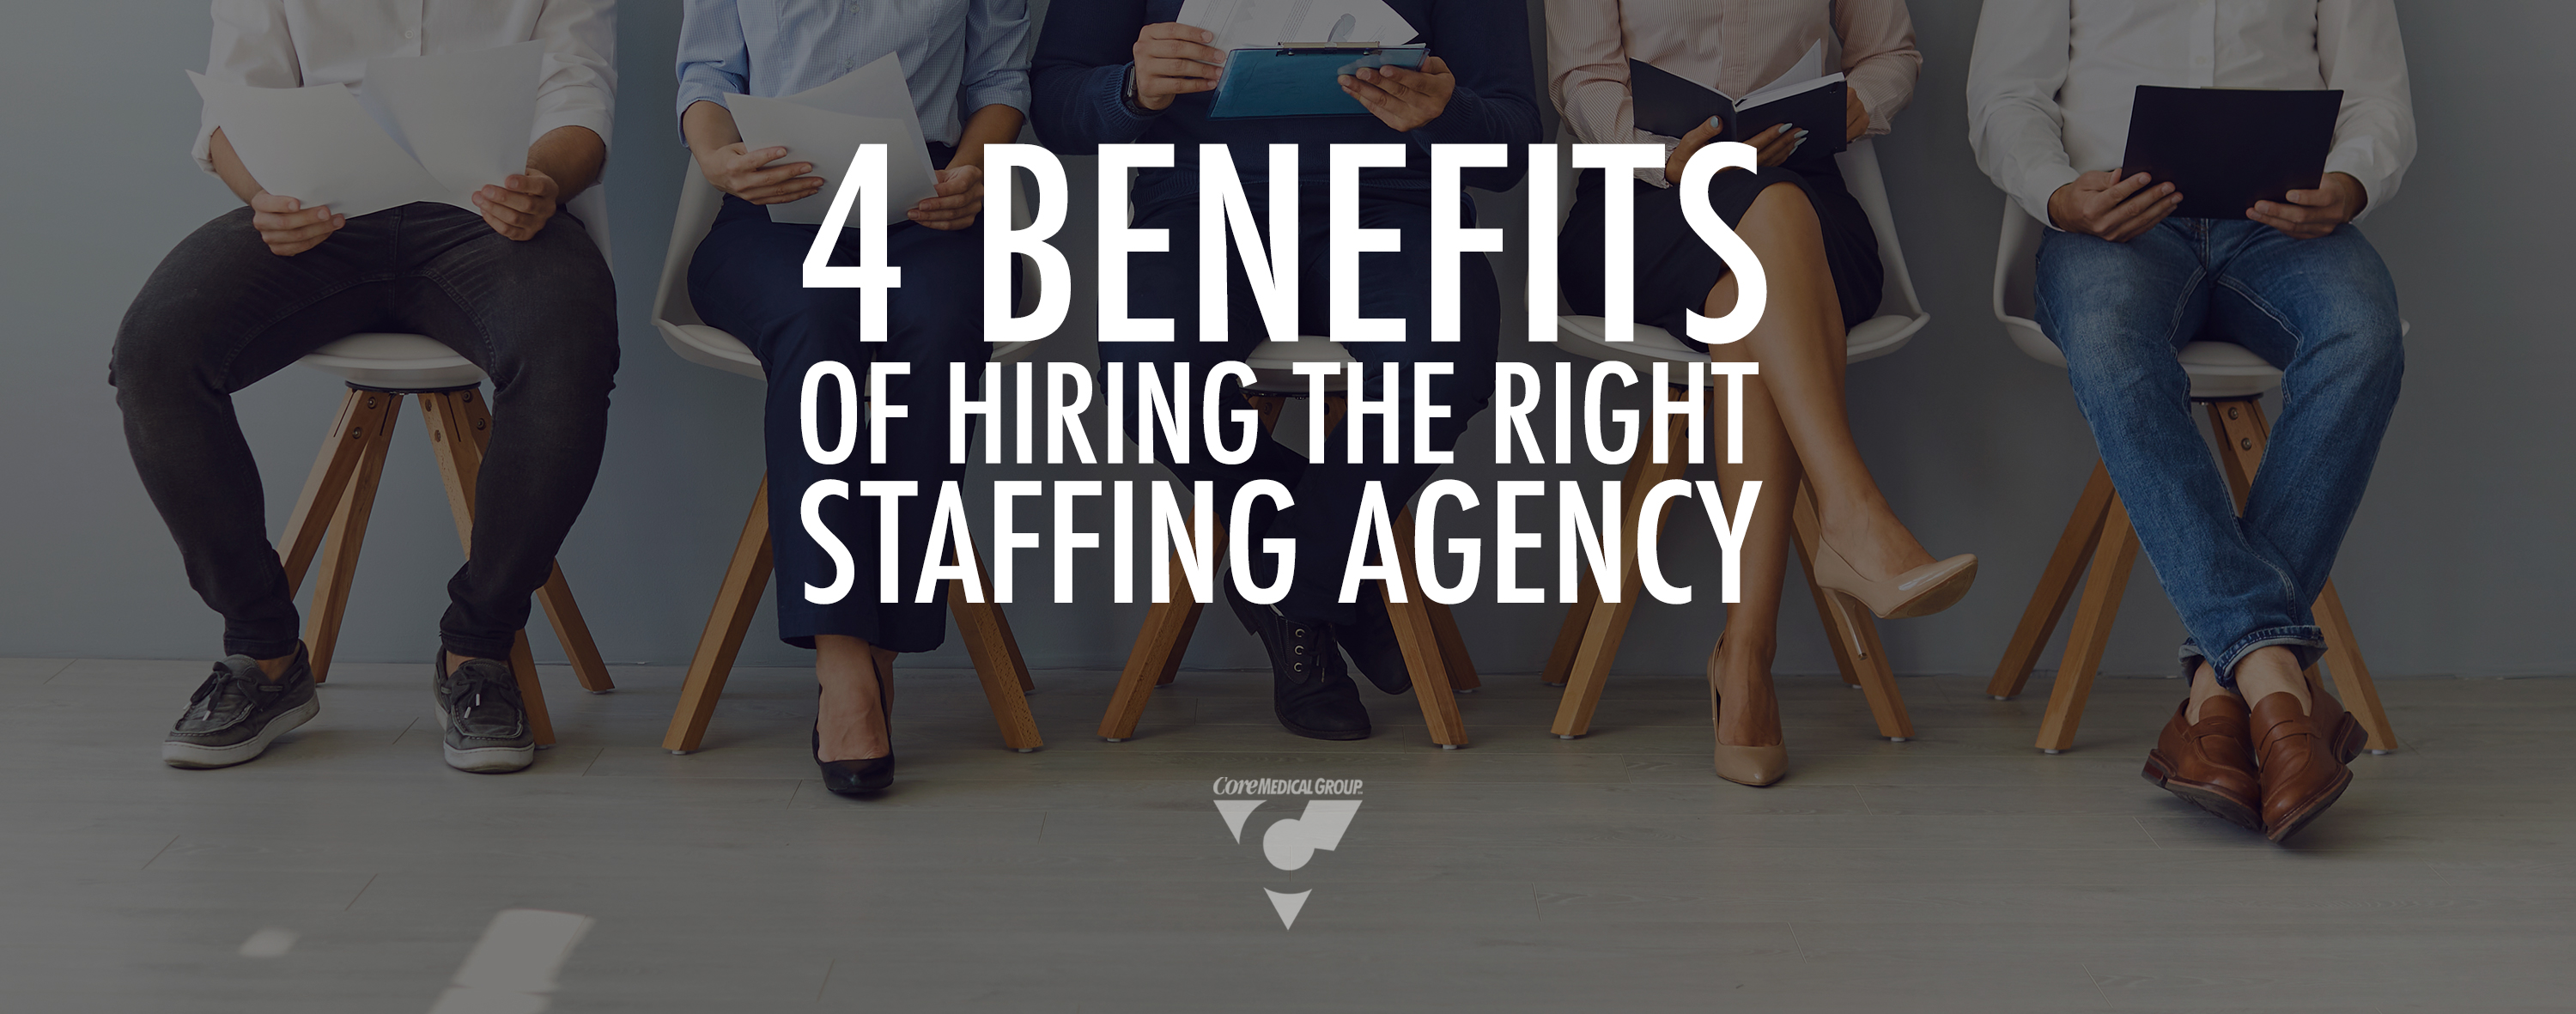 4 Benefits of Hiring the RIght Staffing Agency